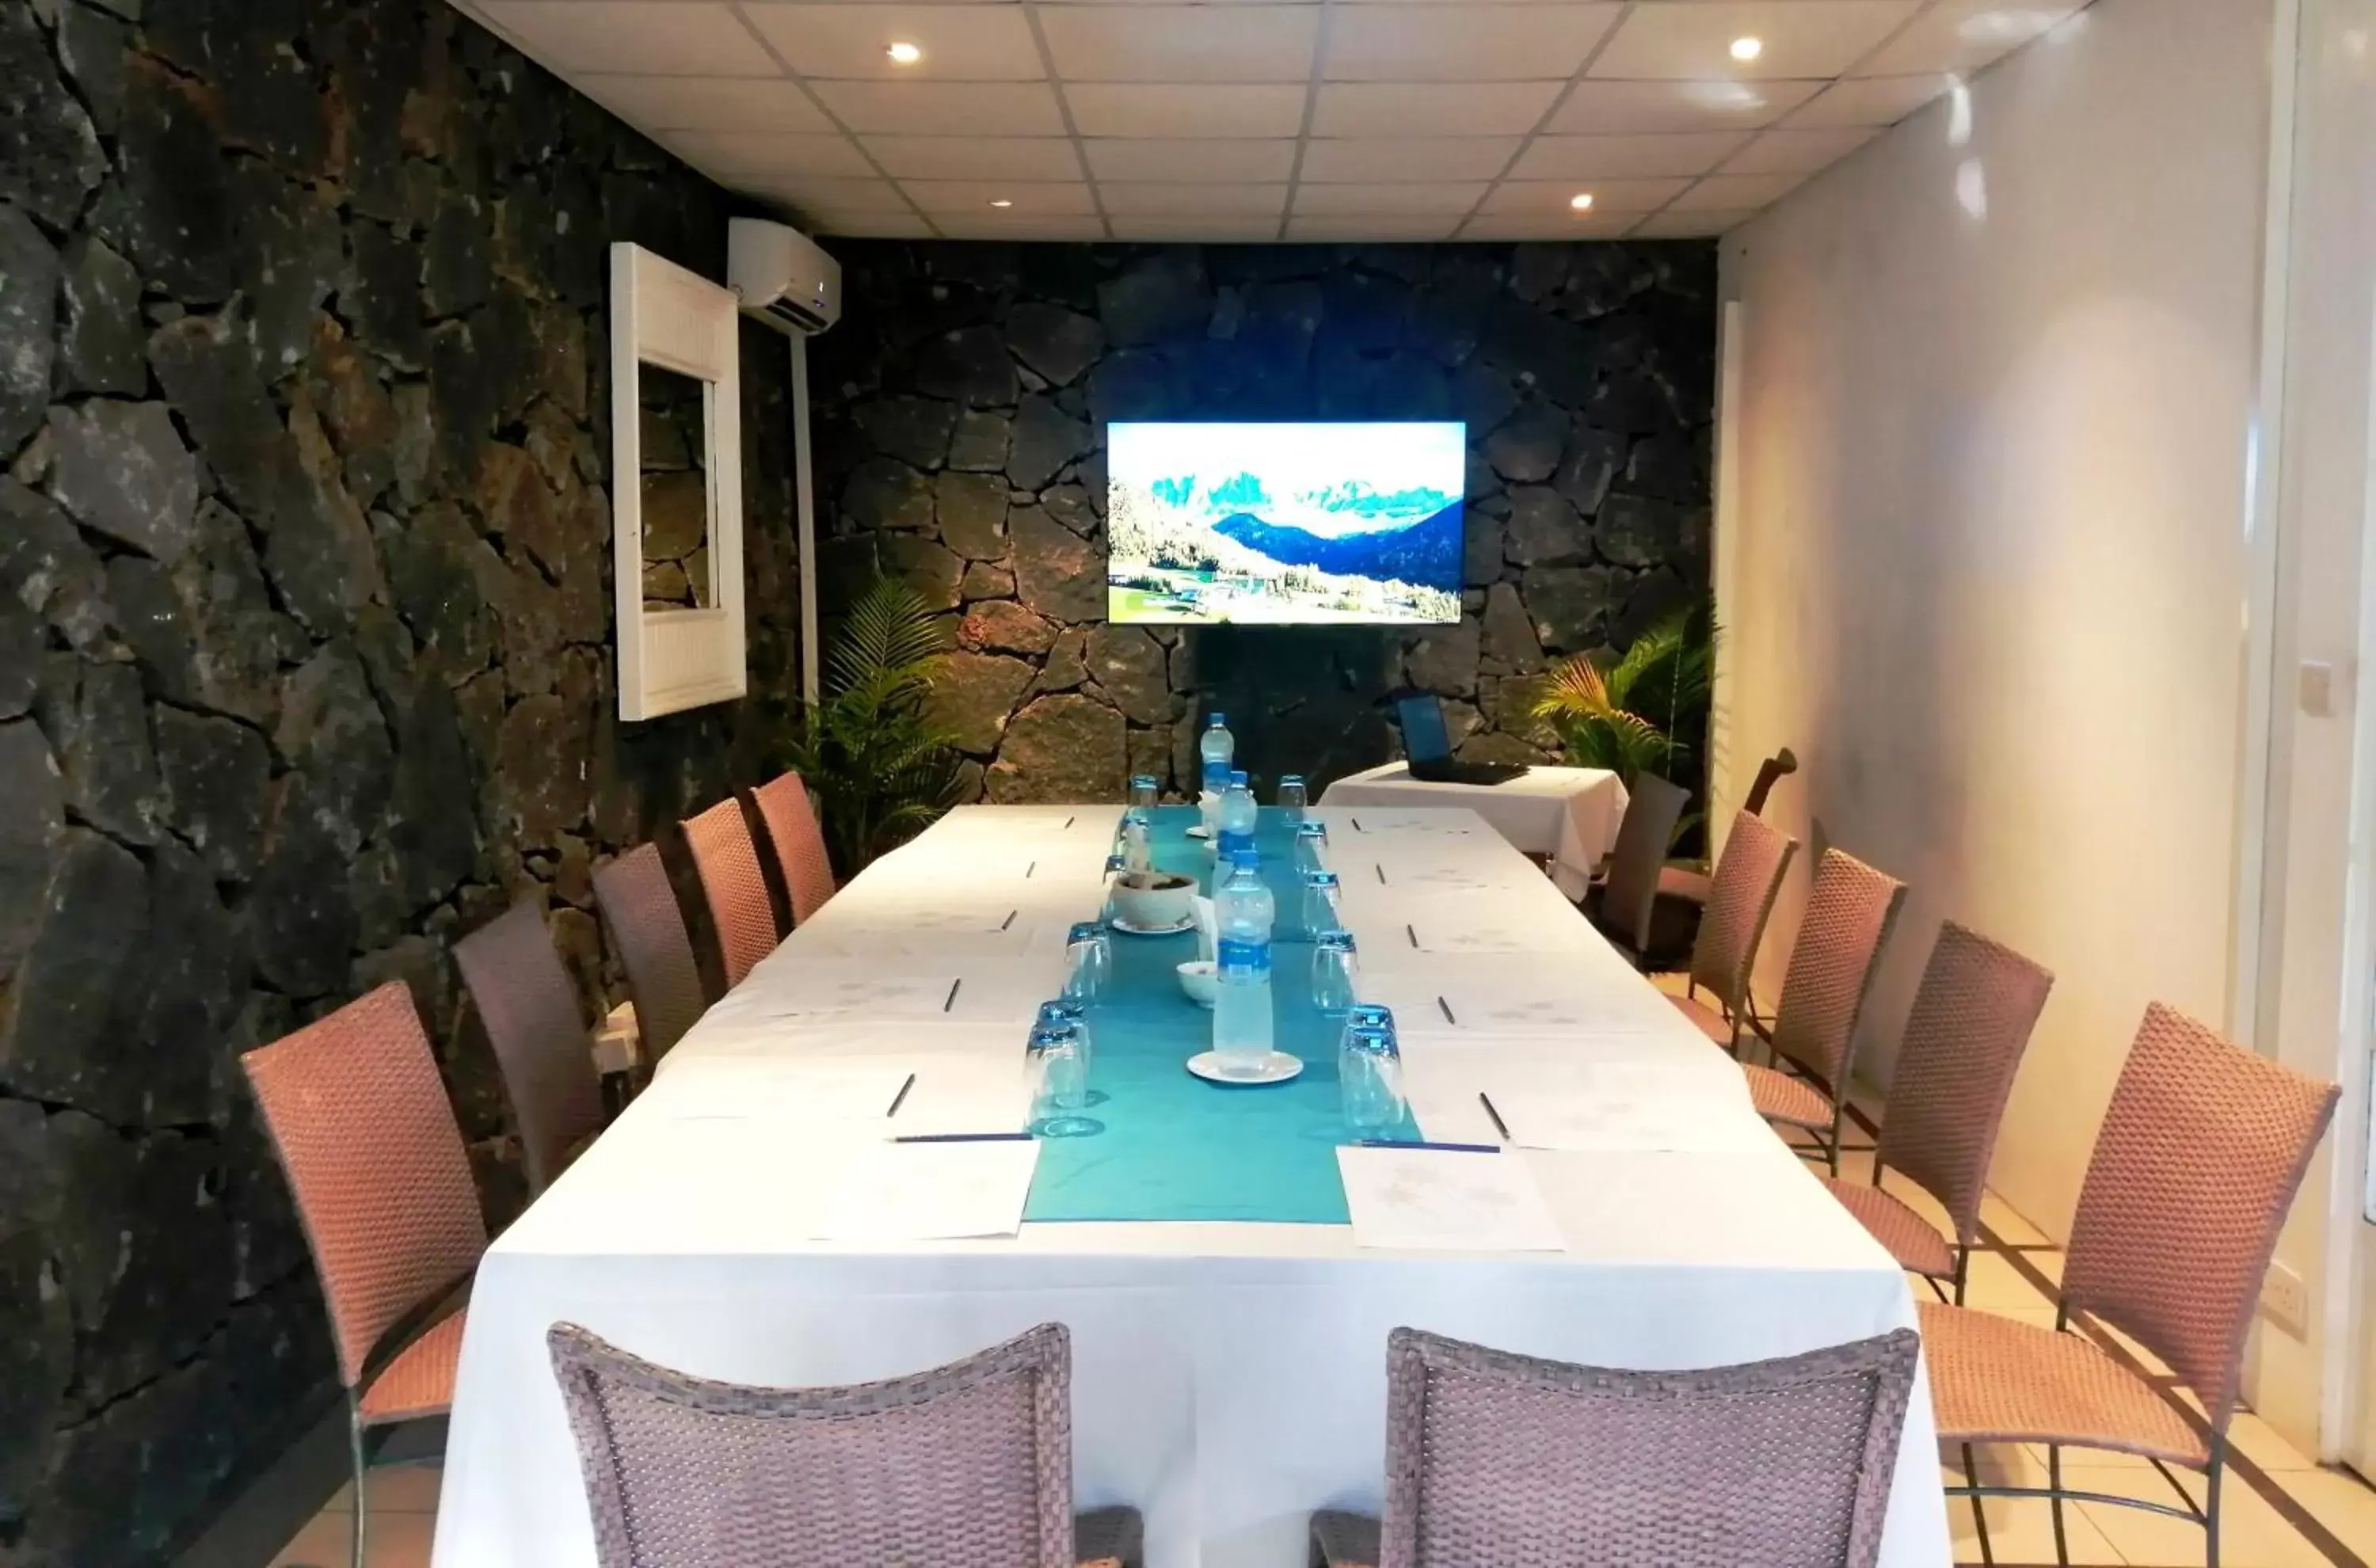 Meeting/conference room in Cocotiers Hotel – Mauritius